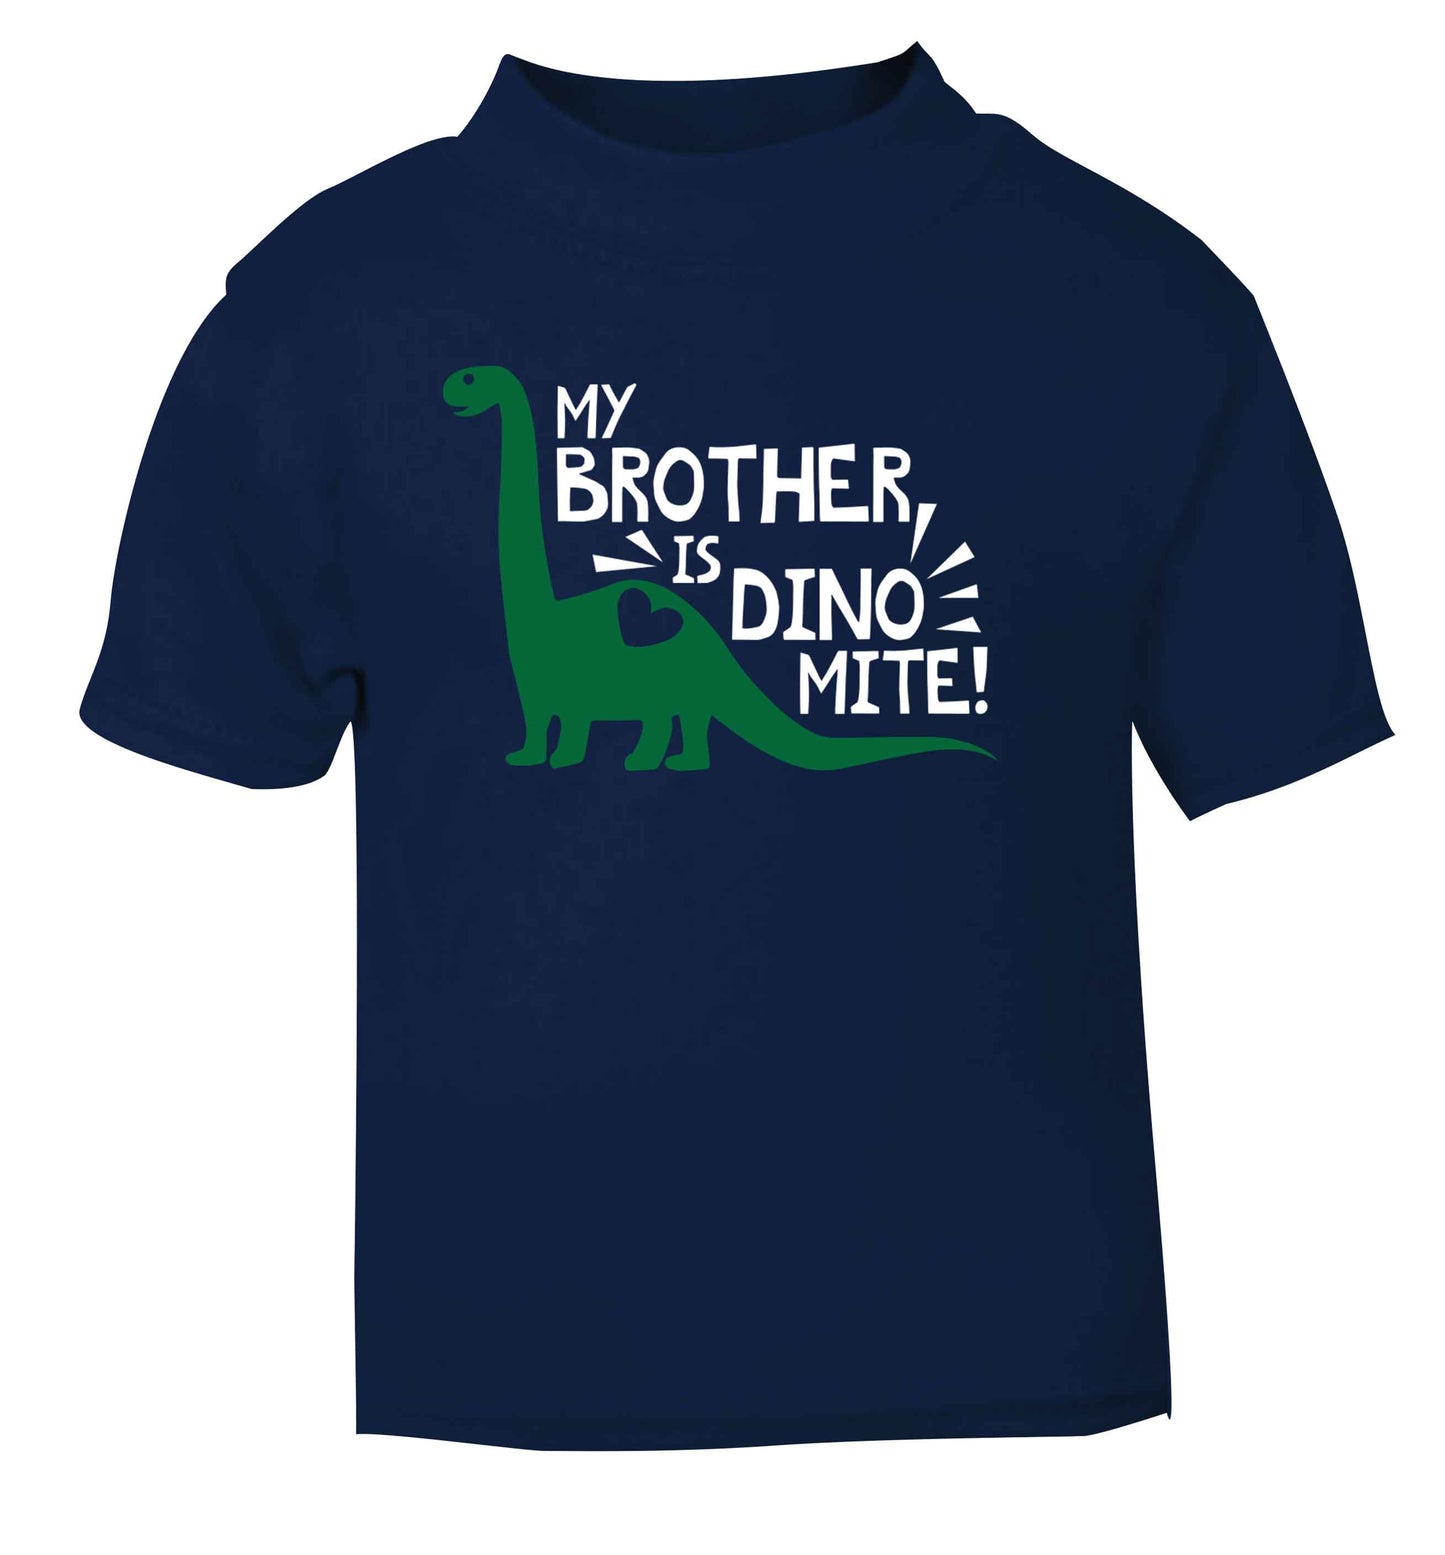 My brother is dinomite! navy Baby Toddler Tshirt 2 Years